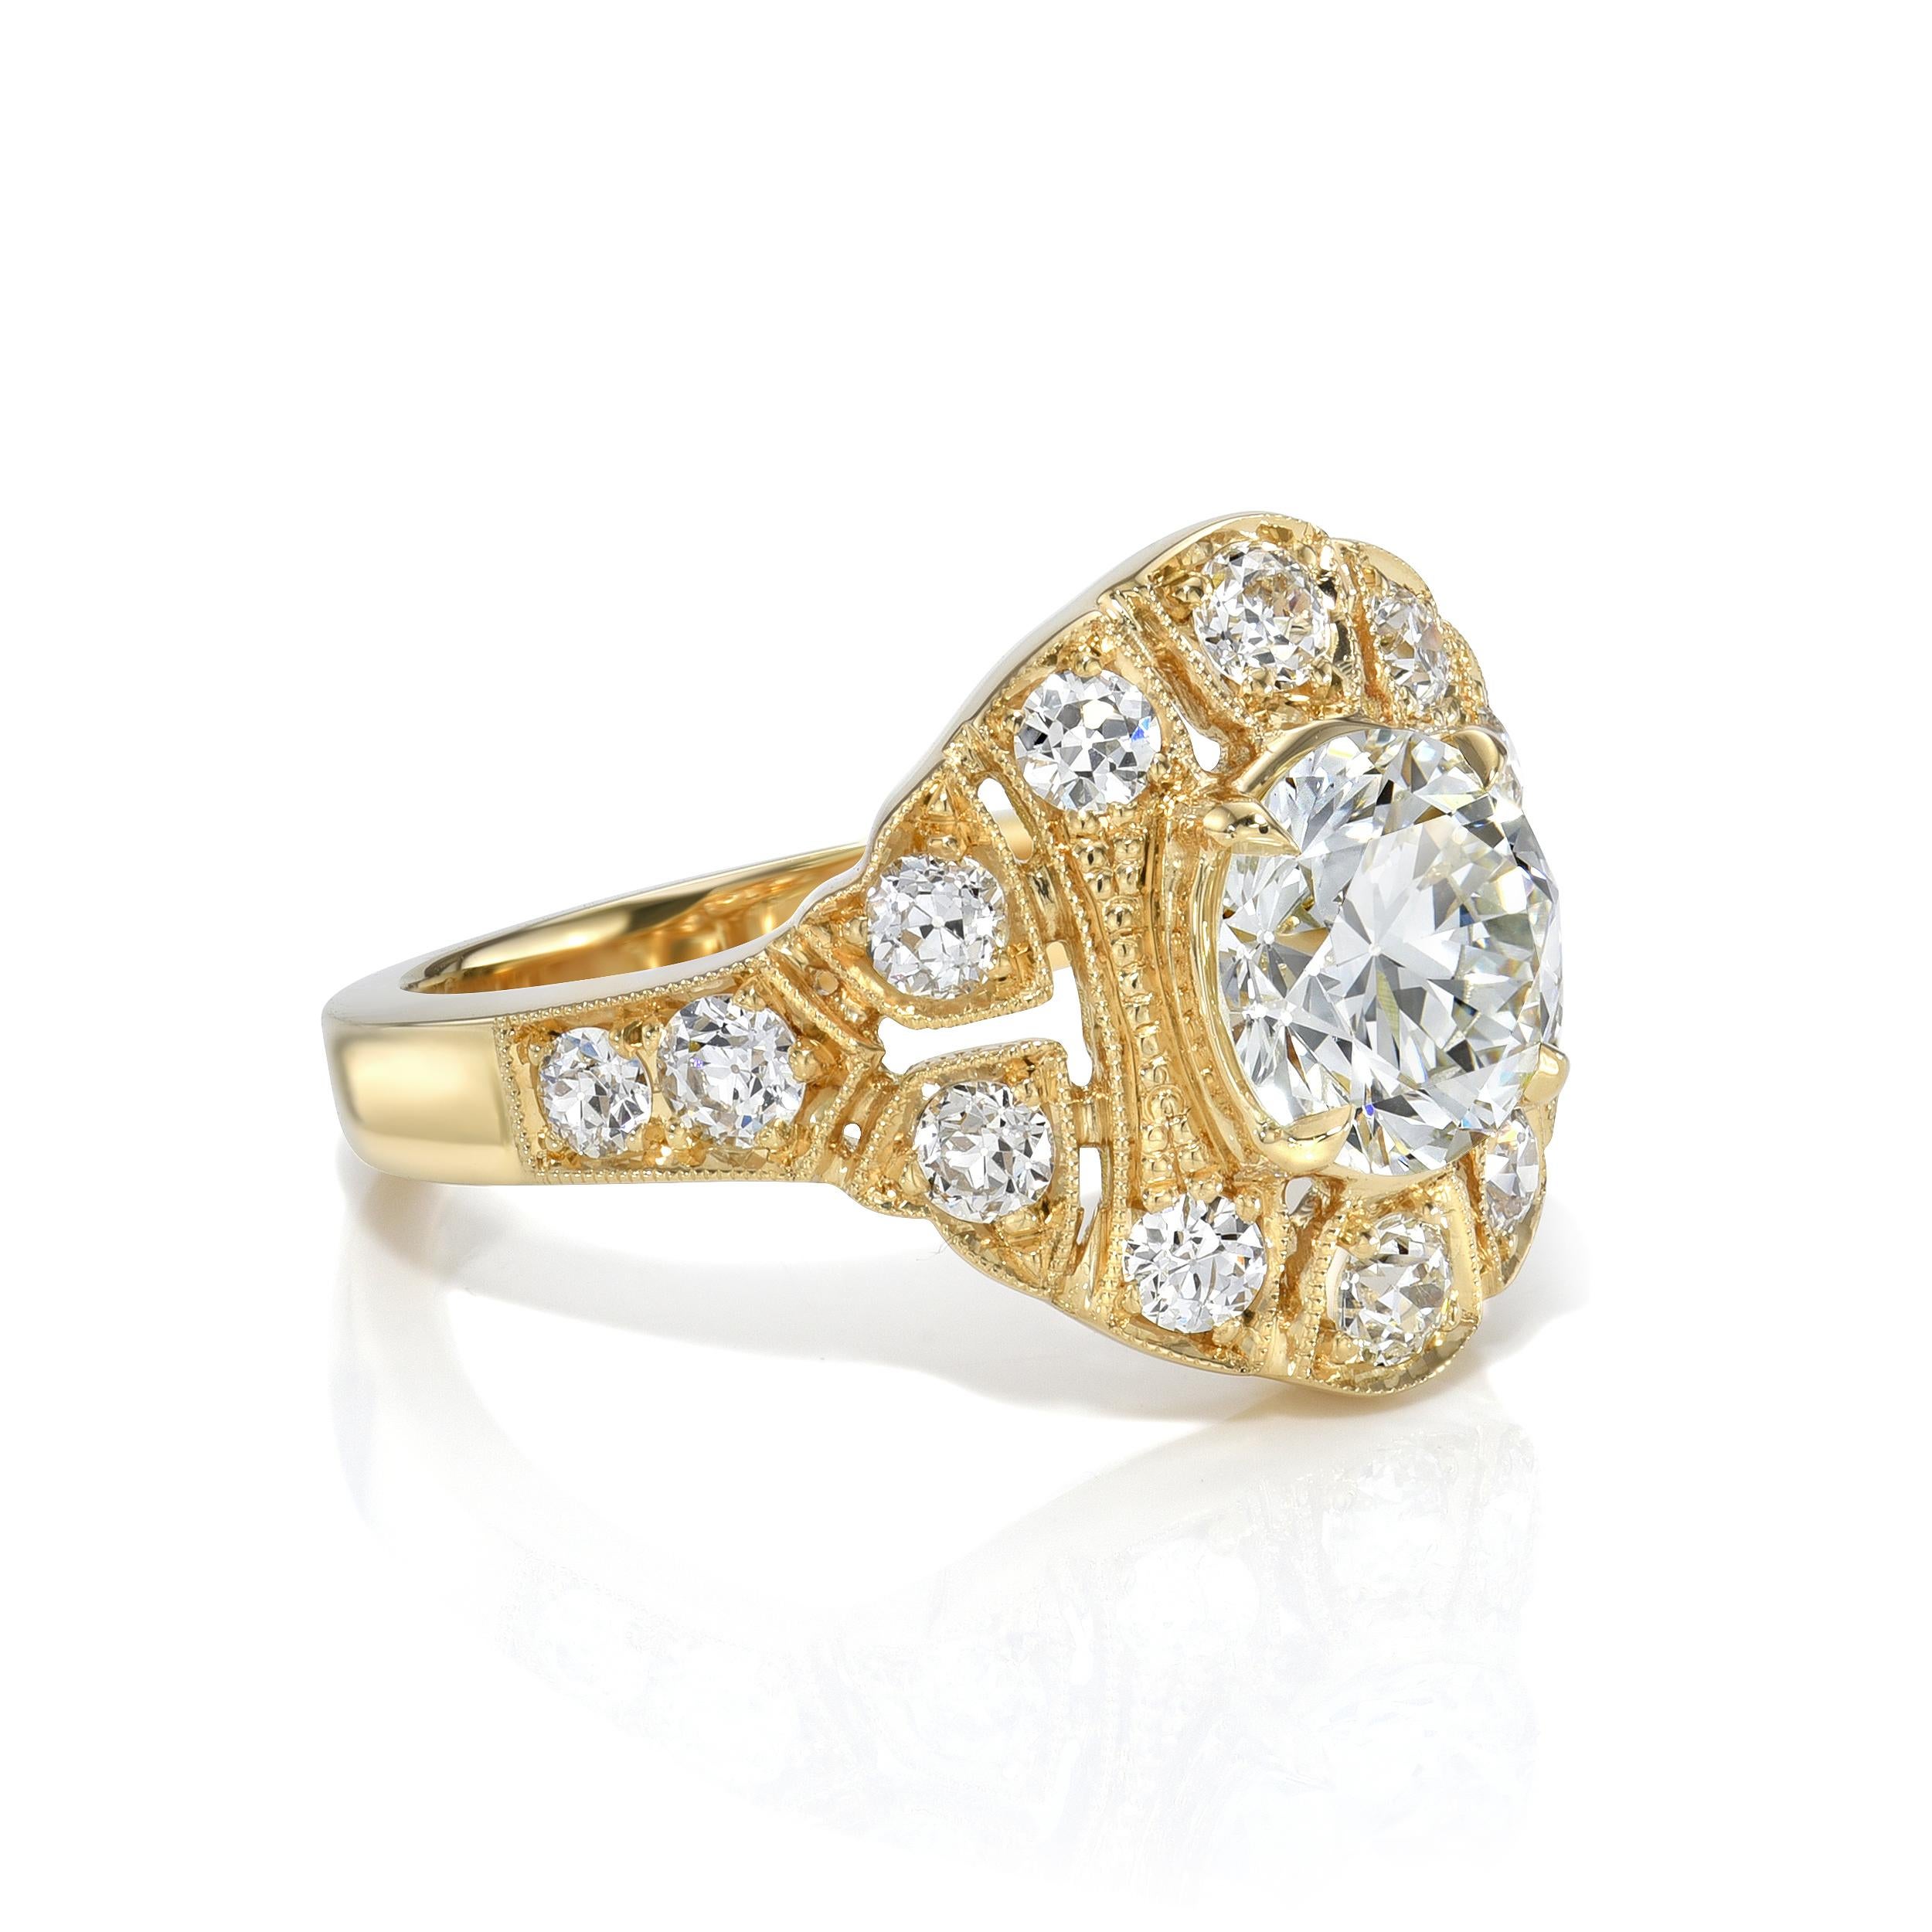 1.33ct H/VS1 GIA certified transitional cut diamond prong set with 0.78ctw old European cut accent diamonds set in a handcrafted 18K yellow gold mounting.